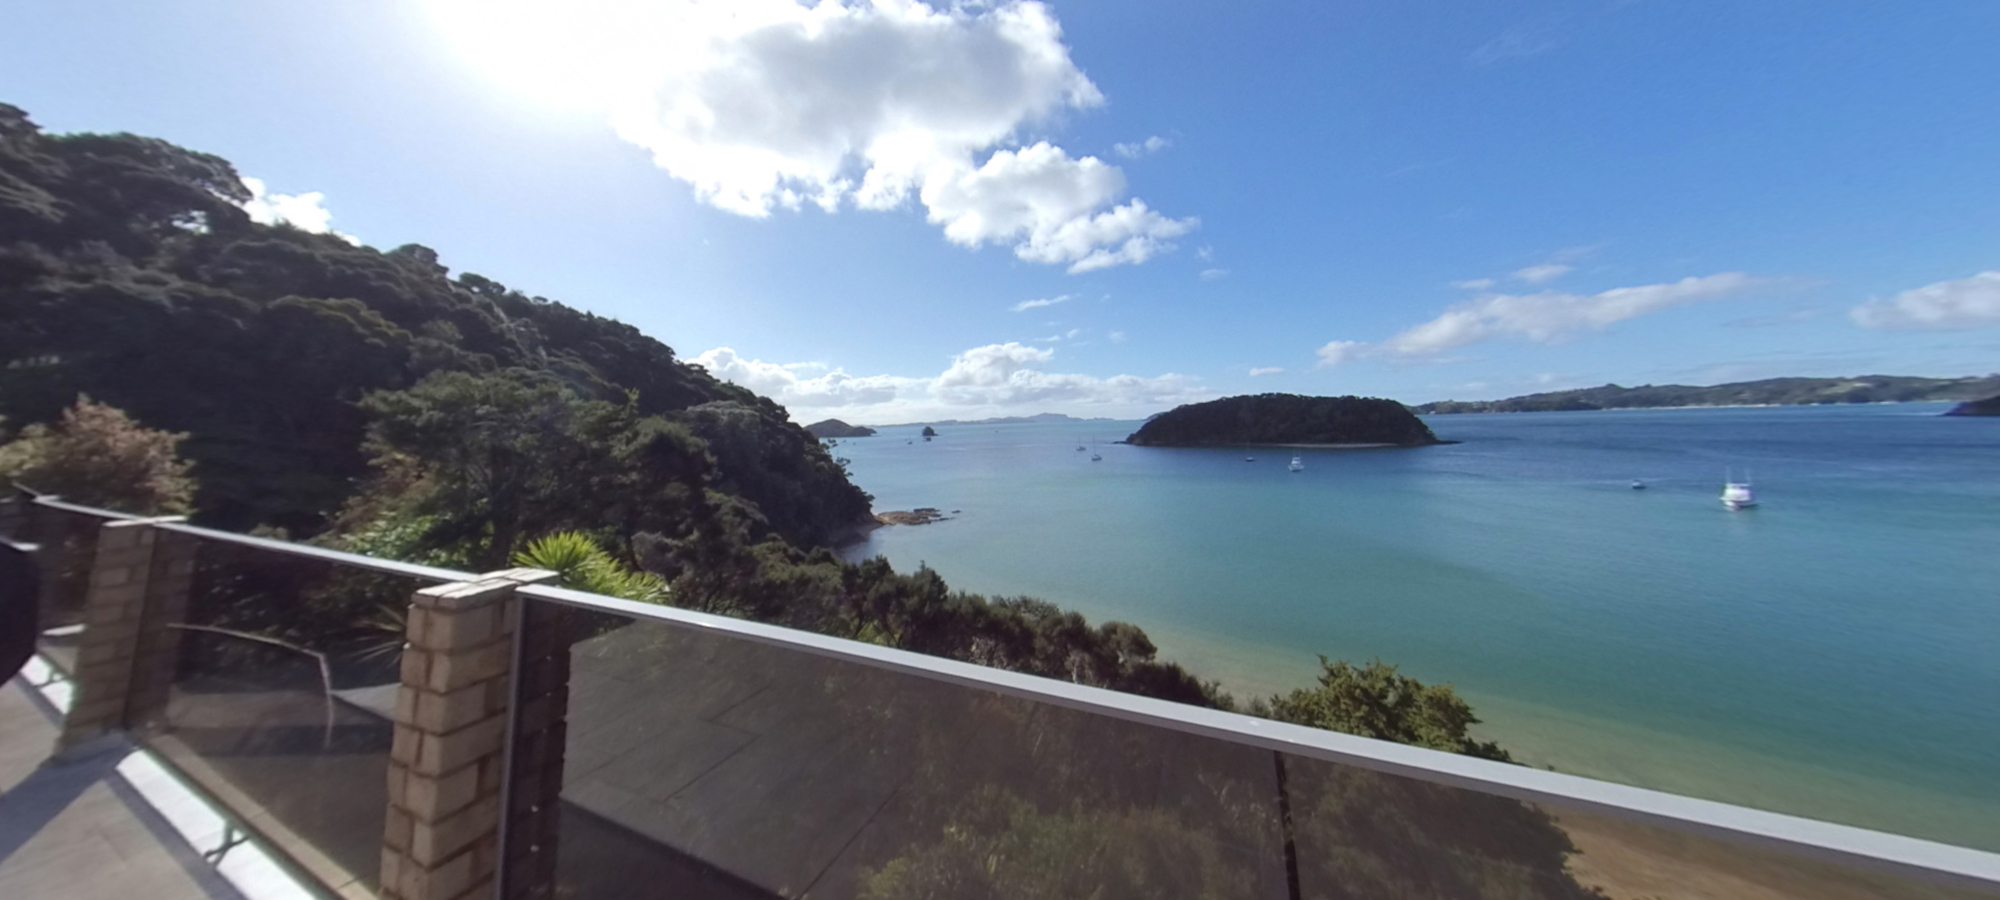 Bay of Islands 360 is a 360° photography company specialising in 360 degree photography and videography, VR tours and drone work